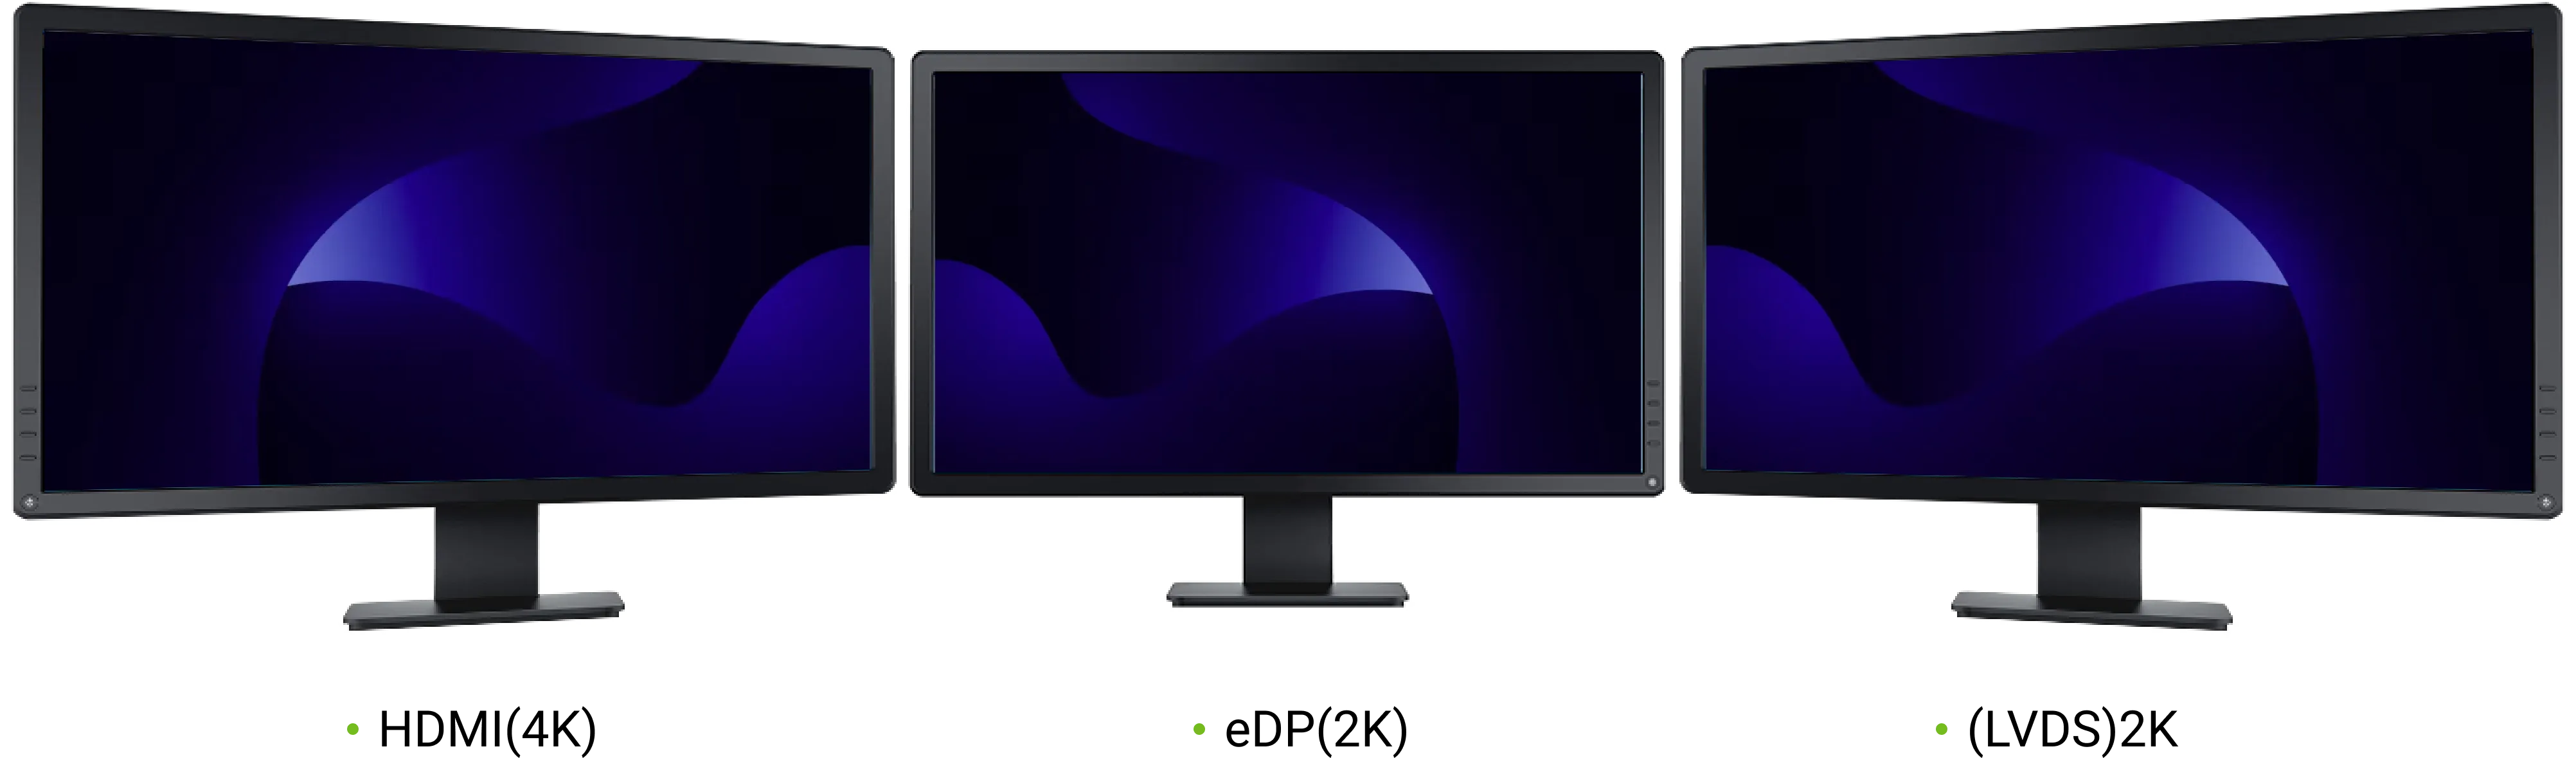 4K Ultra HD Display with Multi-Monitor Support